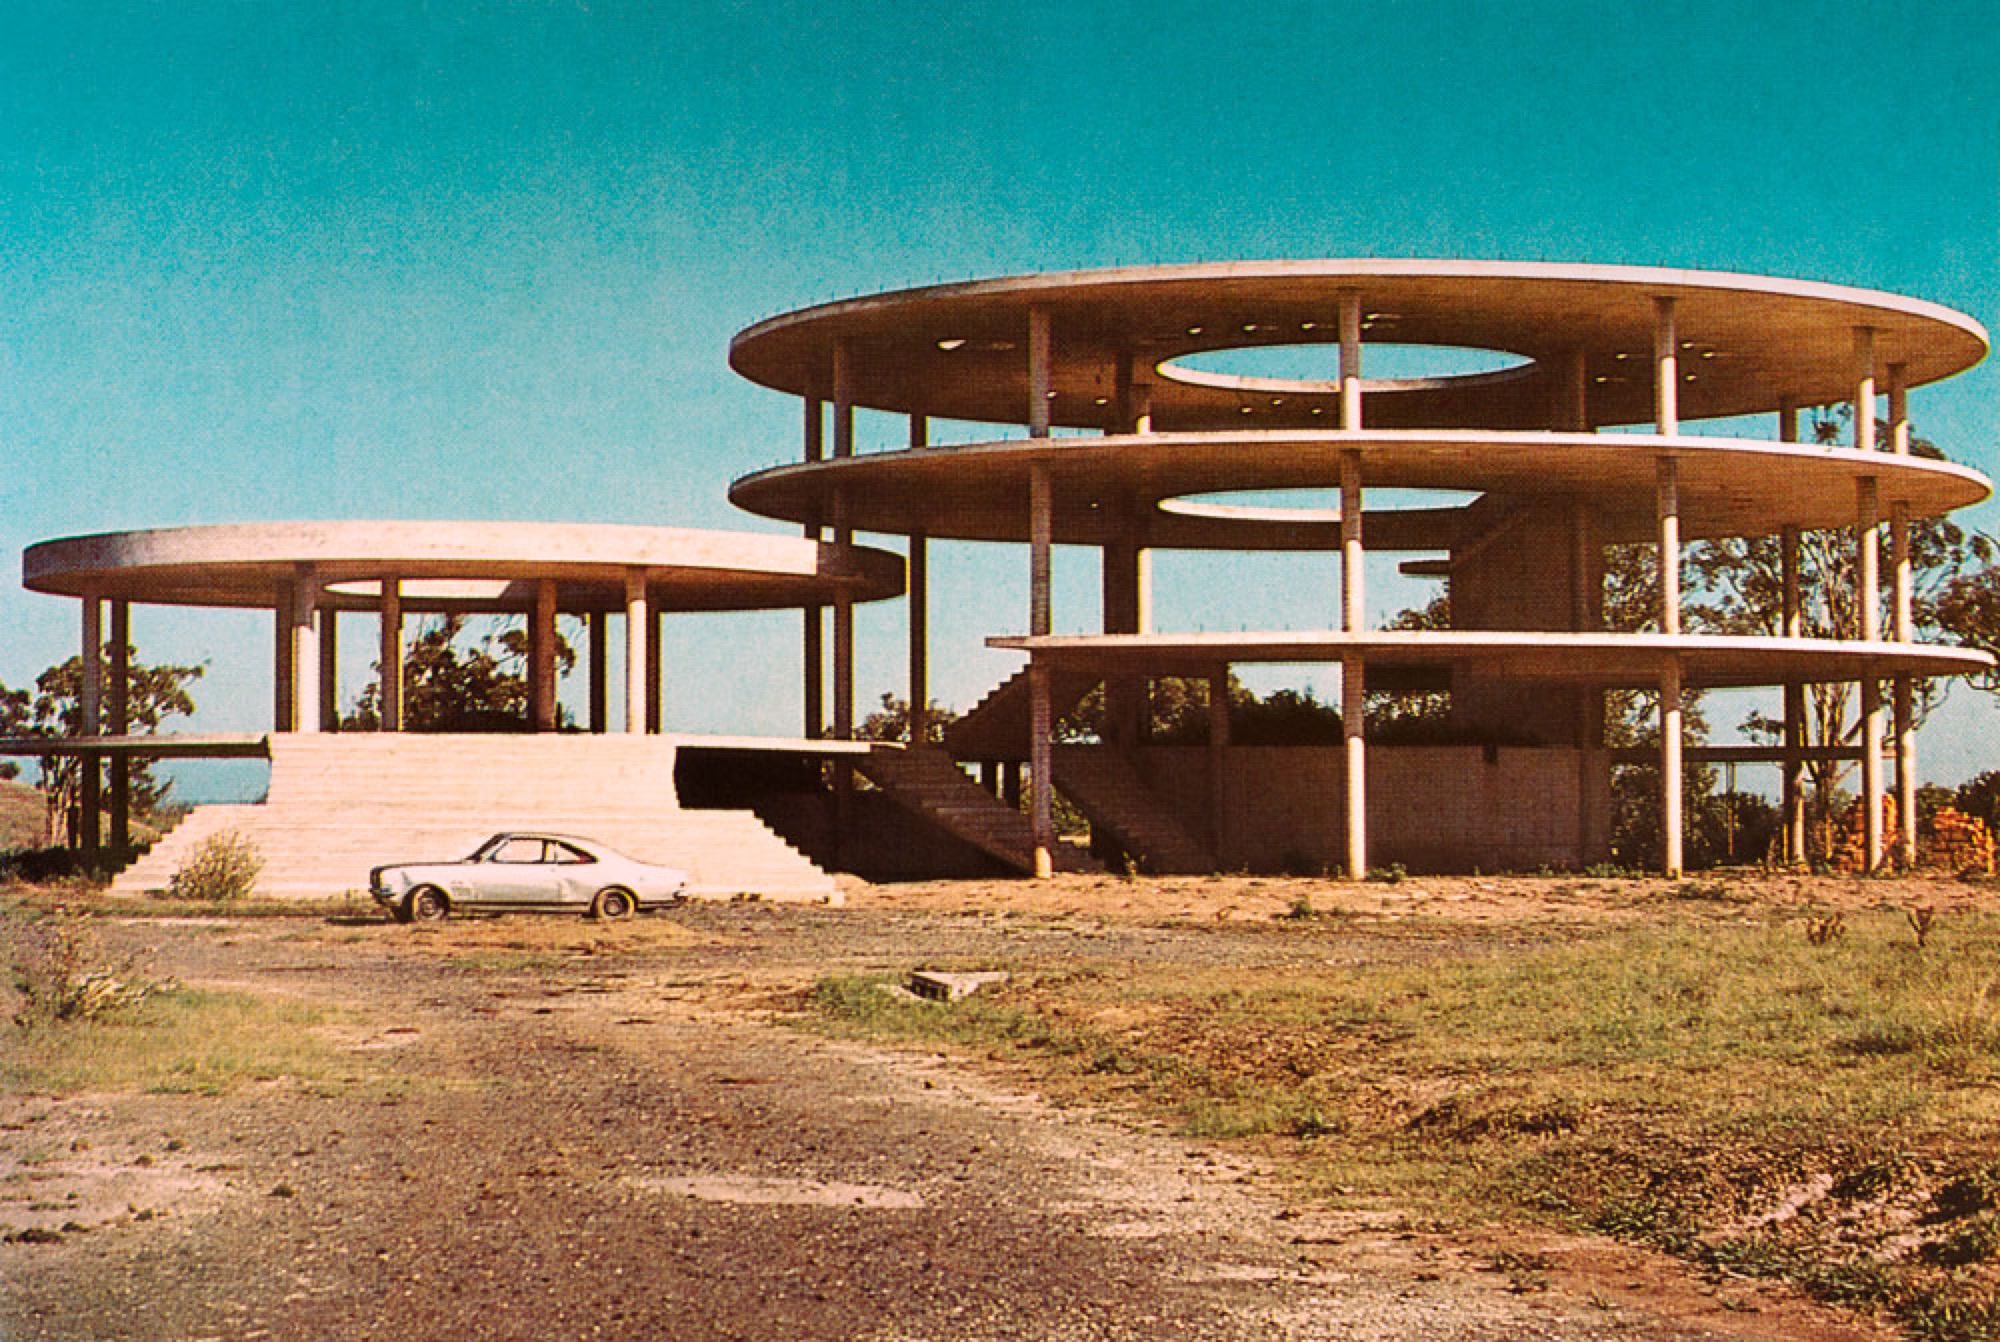 Sonia Leber and David Chesworth, from the project <em>Universal Power House</em>, 2017. Research image. Photo courtesy the artists. Commissioned by Campbelltown Arts Centre, Sydney.